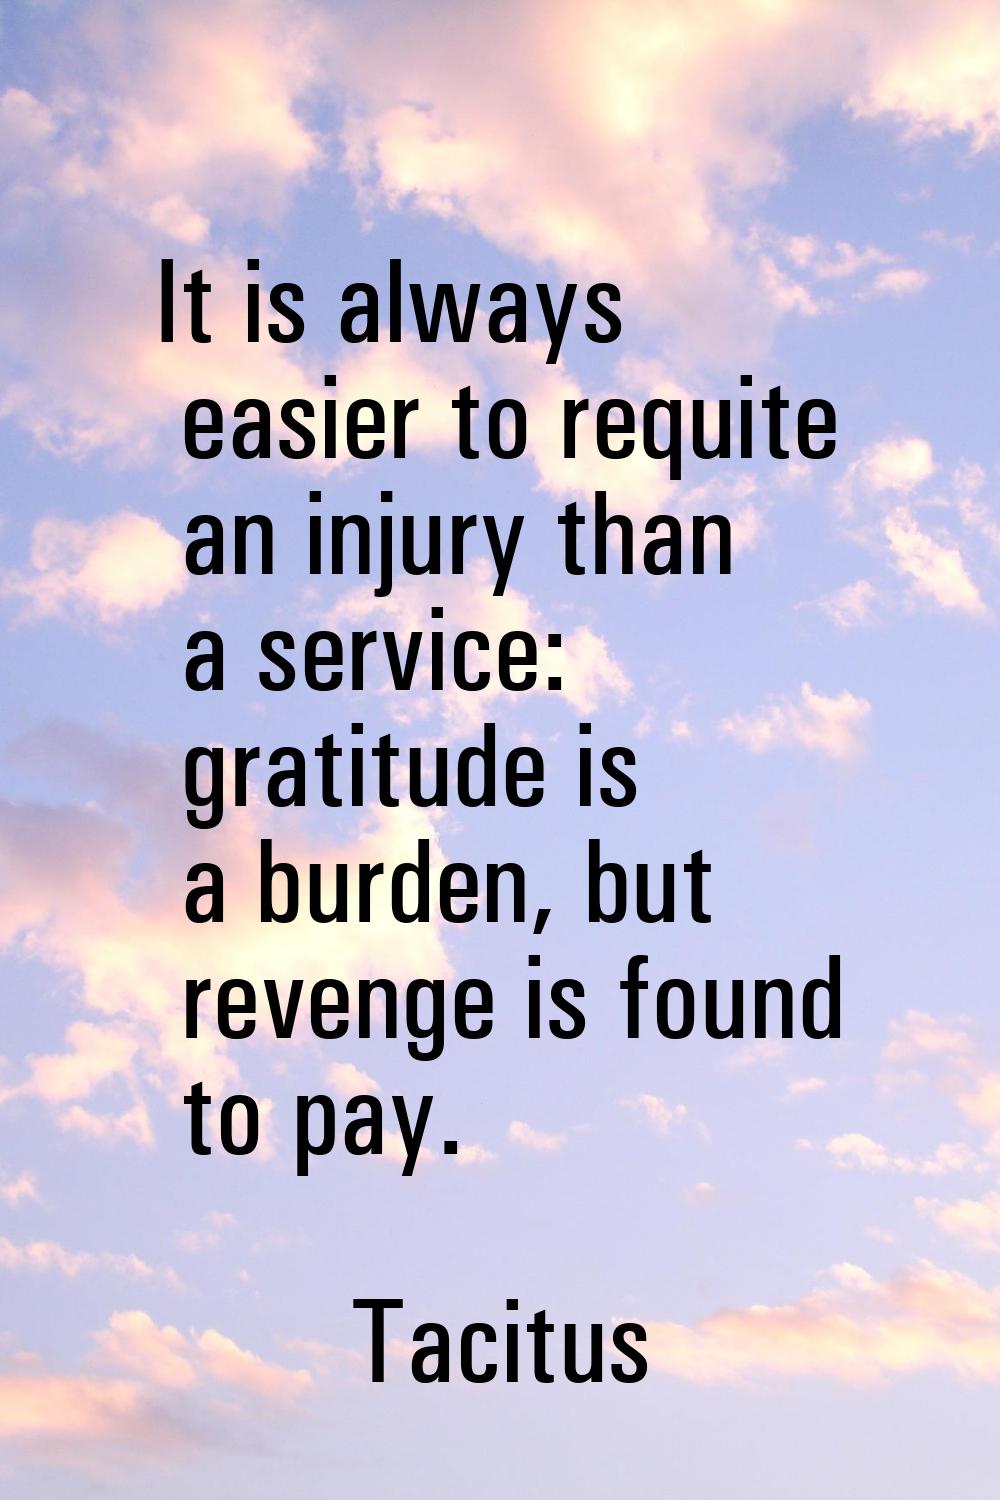 It is always easier to requite an injury than a service: gratitude is a burden, but revenge is foun